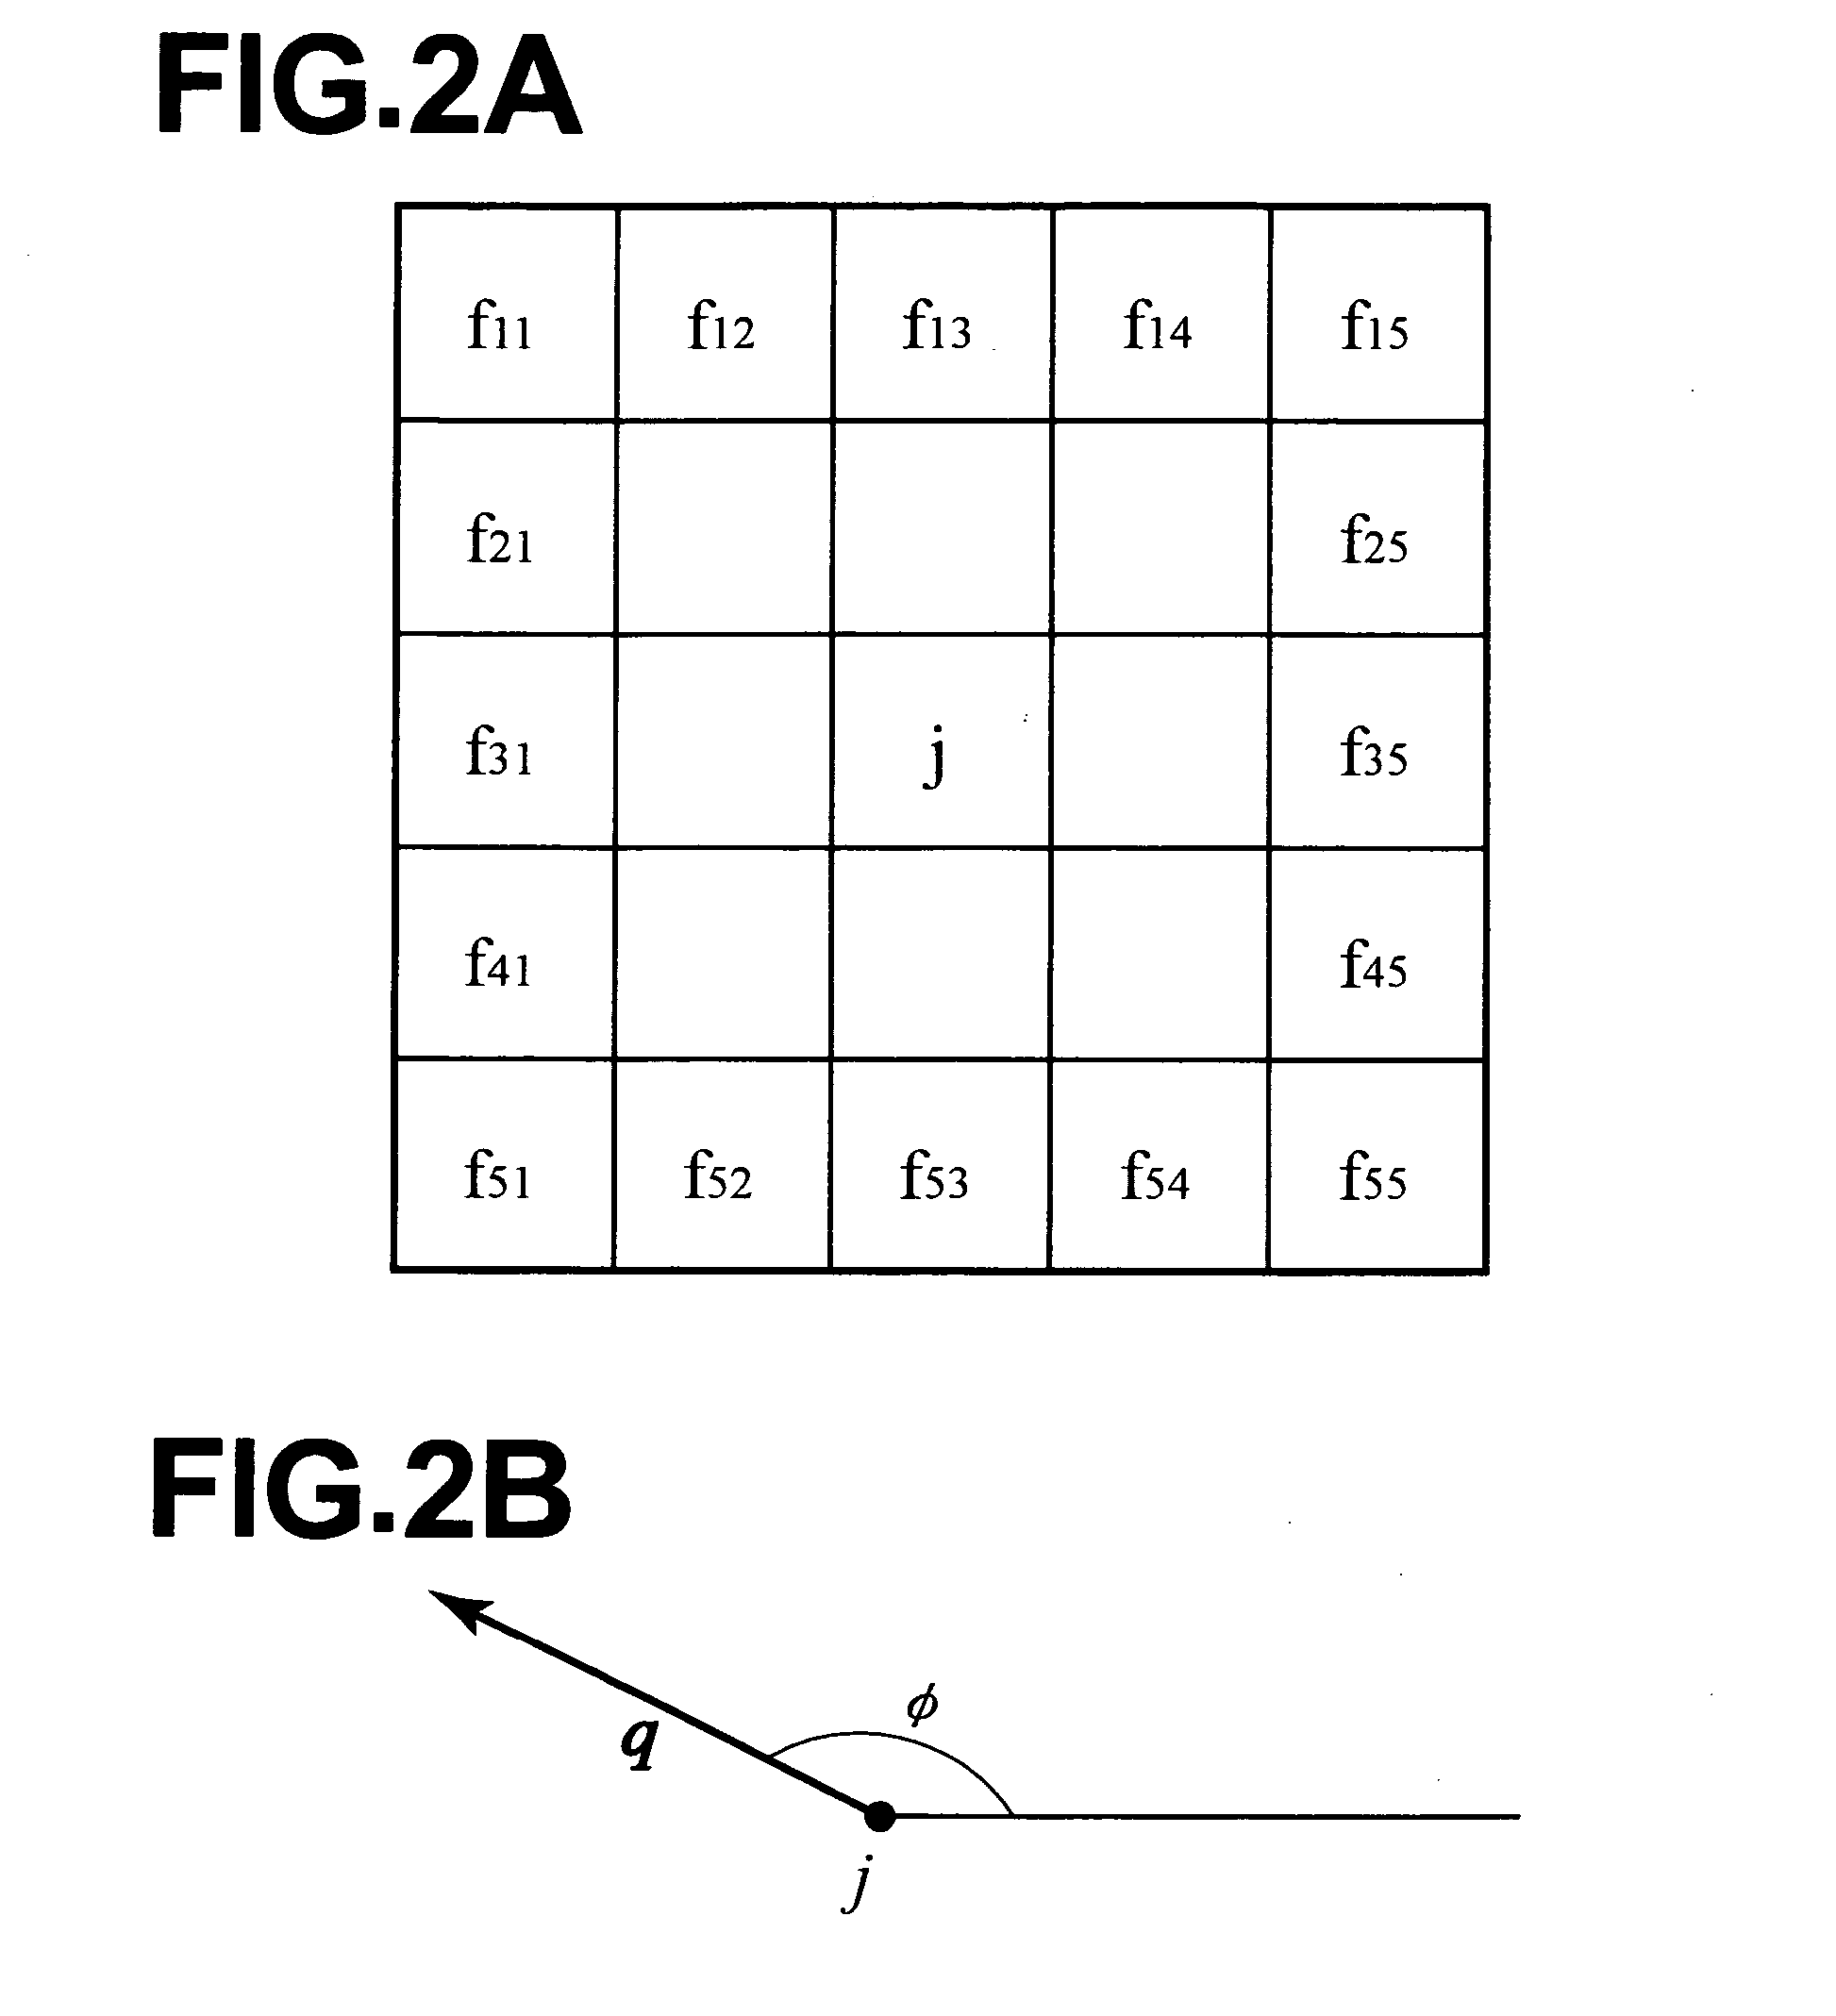 Abnormal pattern candidate detecting method and apparatus